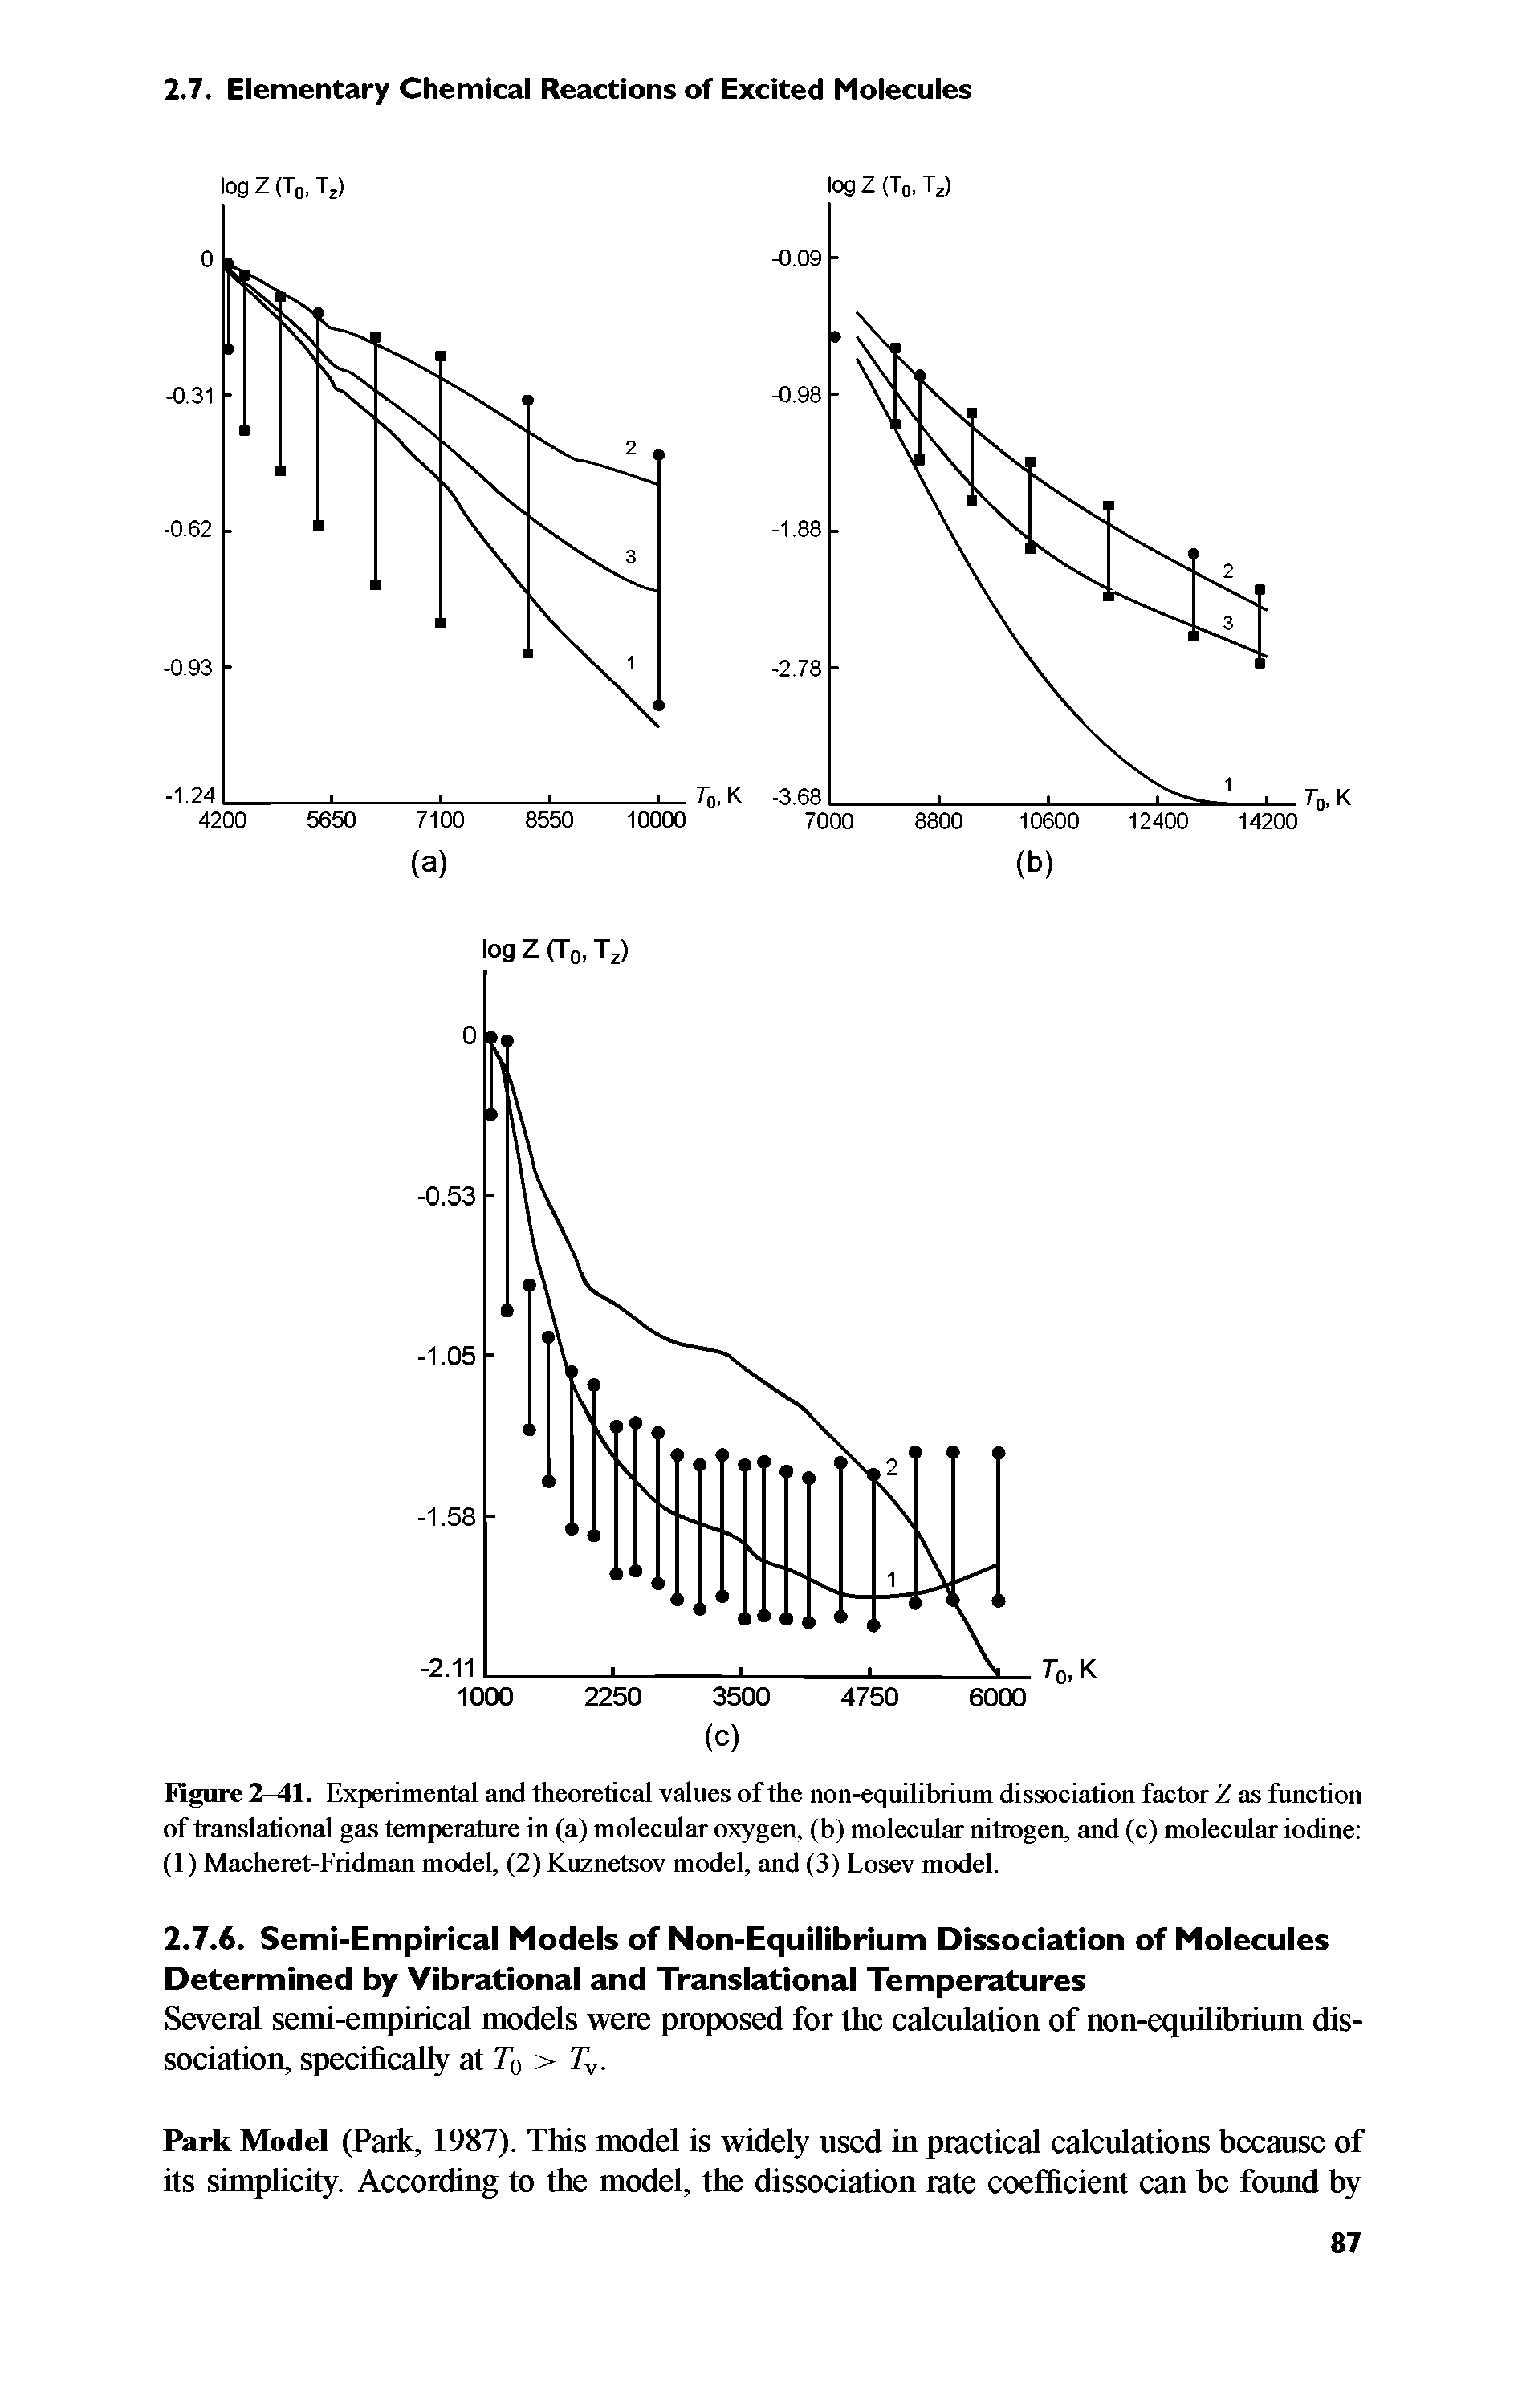 Figure 2- 1. Experimental and theoretieal values of the non-equilibrium dissoeiation factor Z as function of translational gas temperature in (a) molecular oxygen, (b) molecular nitrogen, and (c) molecular iodine (1) Macheret-Fridman model, (2) Kuznetsov model, and (3) Losev model.